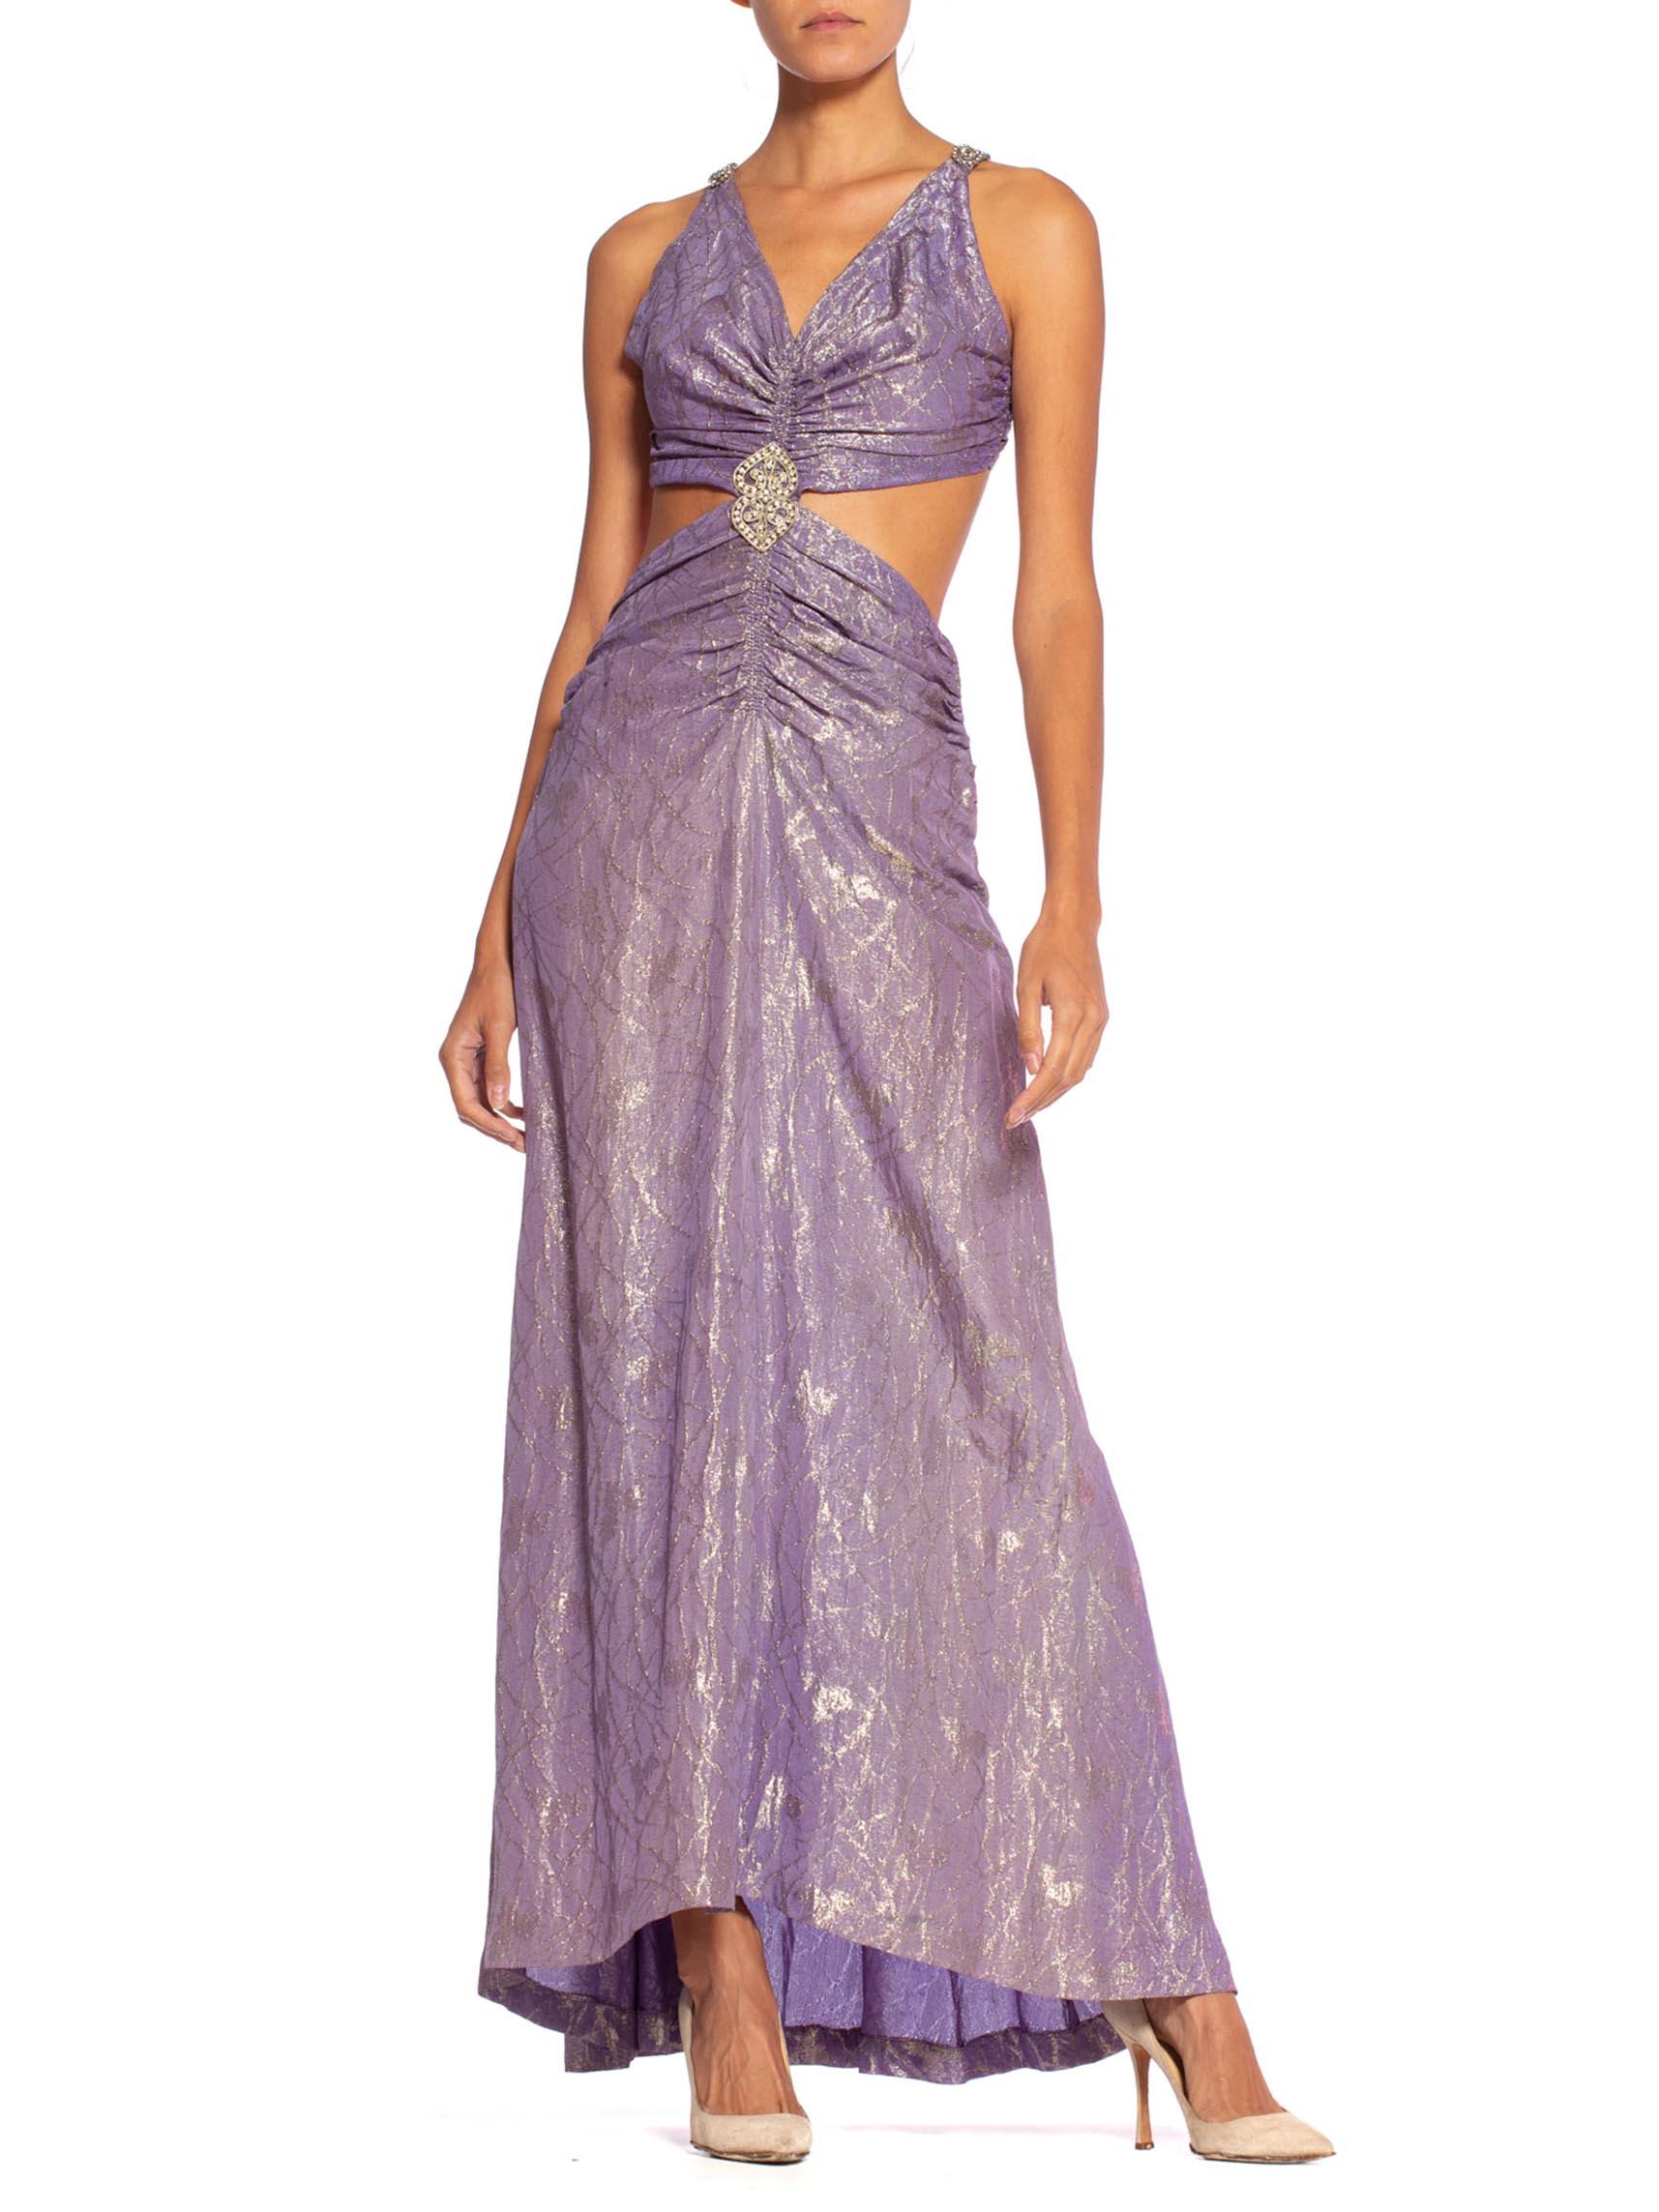 MORPHEW COLLECTION Lilac Silver Antique Silk Lamé  Gown With 1930S Crystals
MORPHEW COLLECTION is made entirely by hand in our NYC Ateliér of rare antique materials sourced from around the globe. Our sustainable vintage materials represent over a